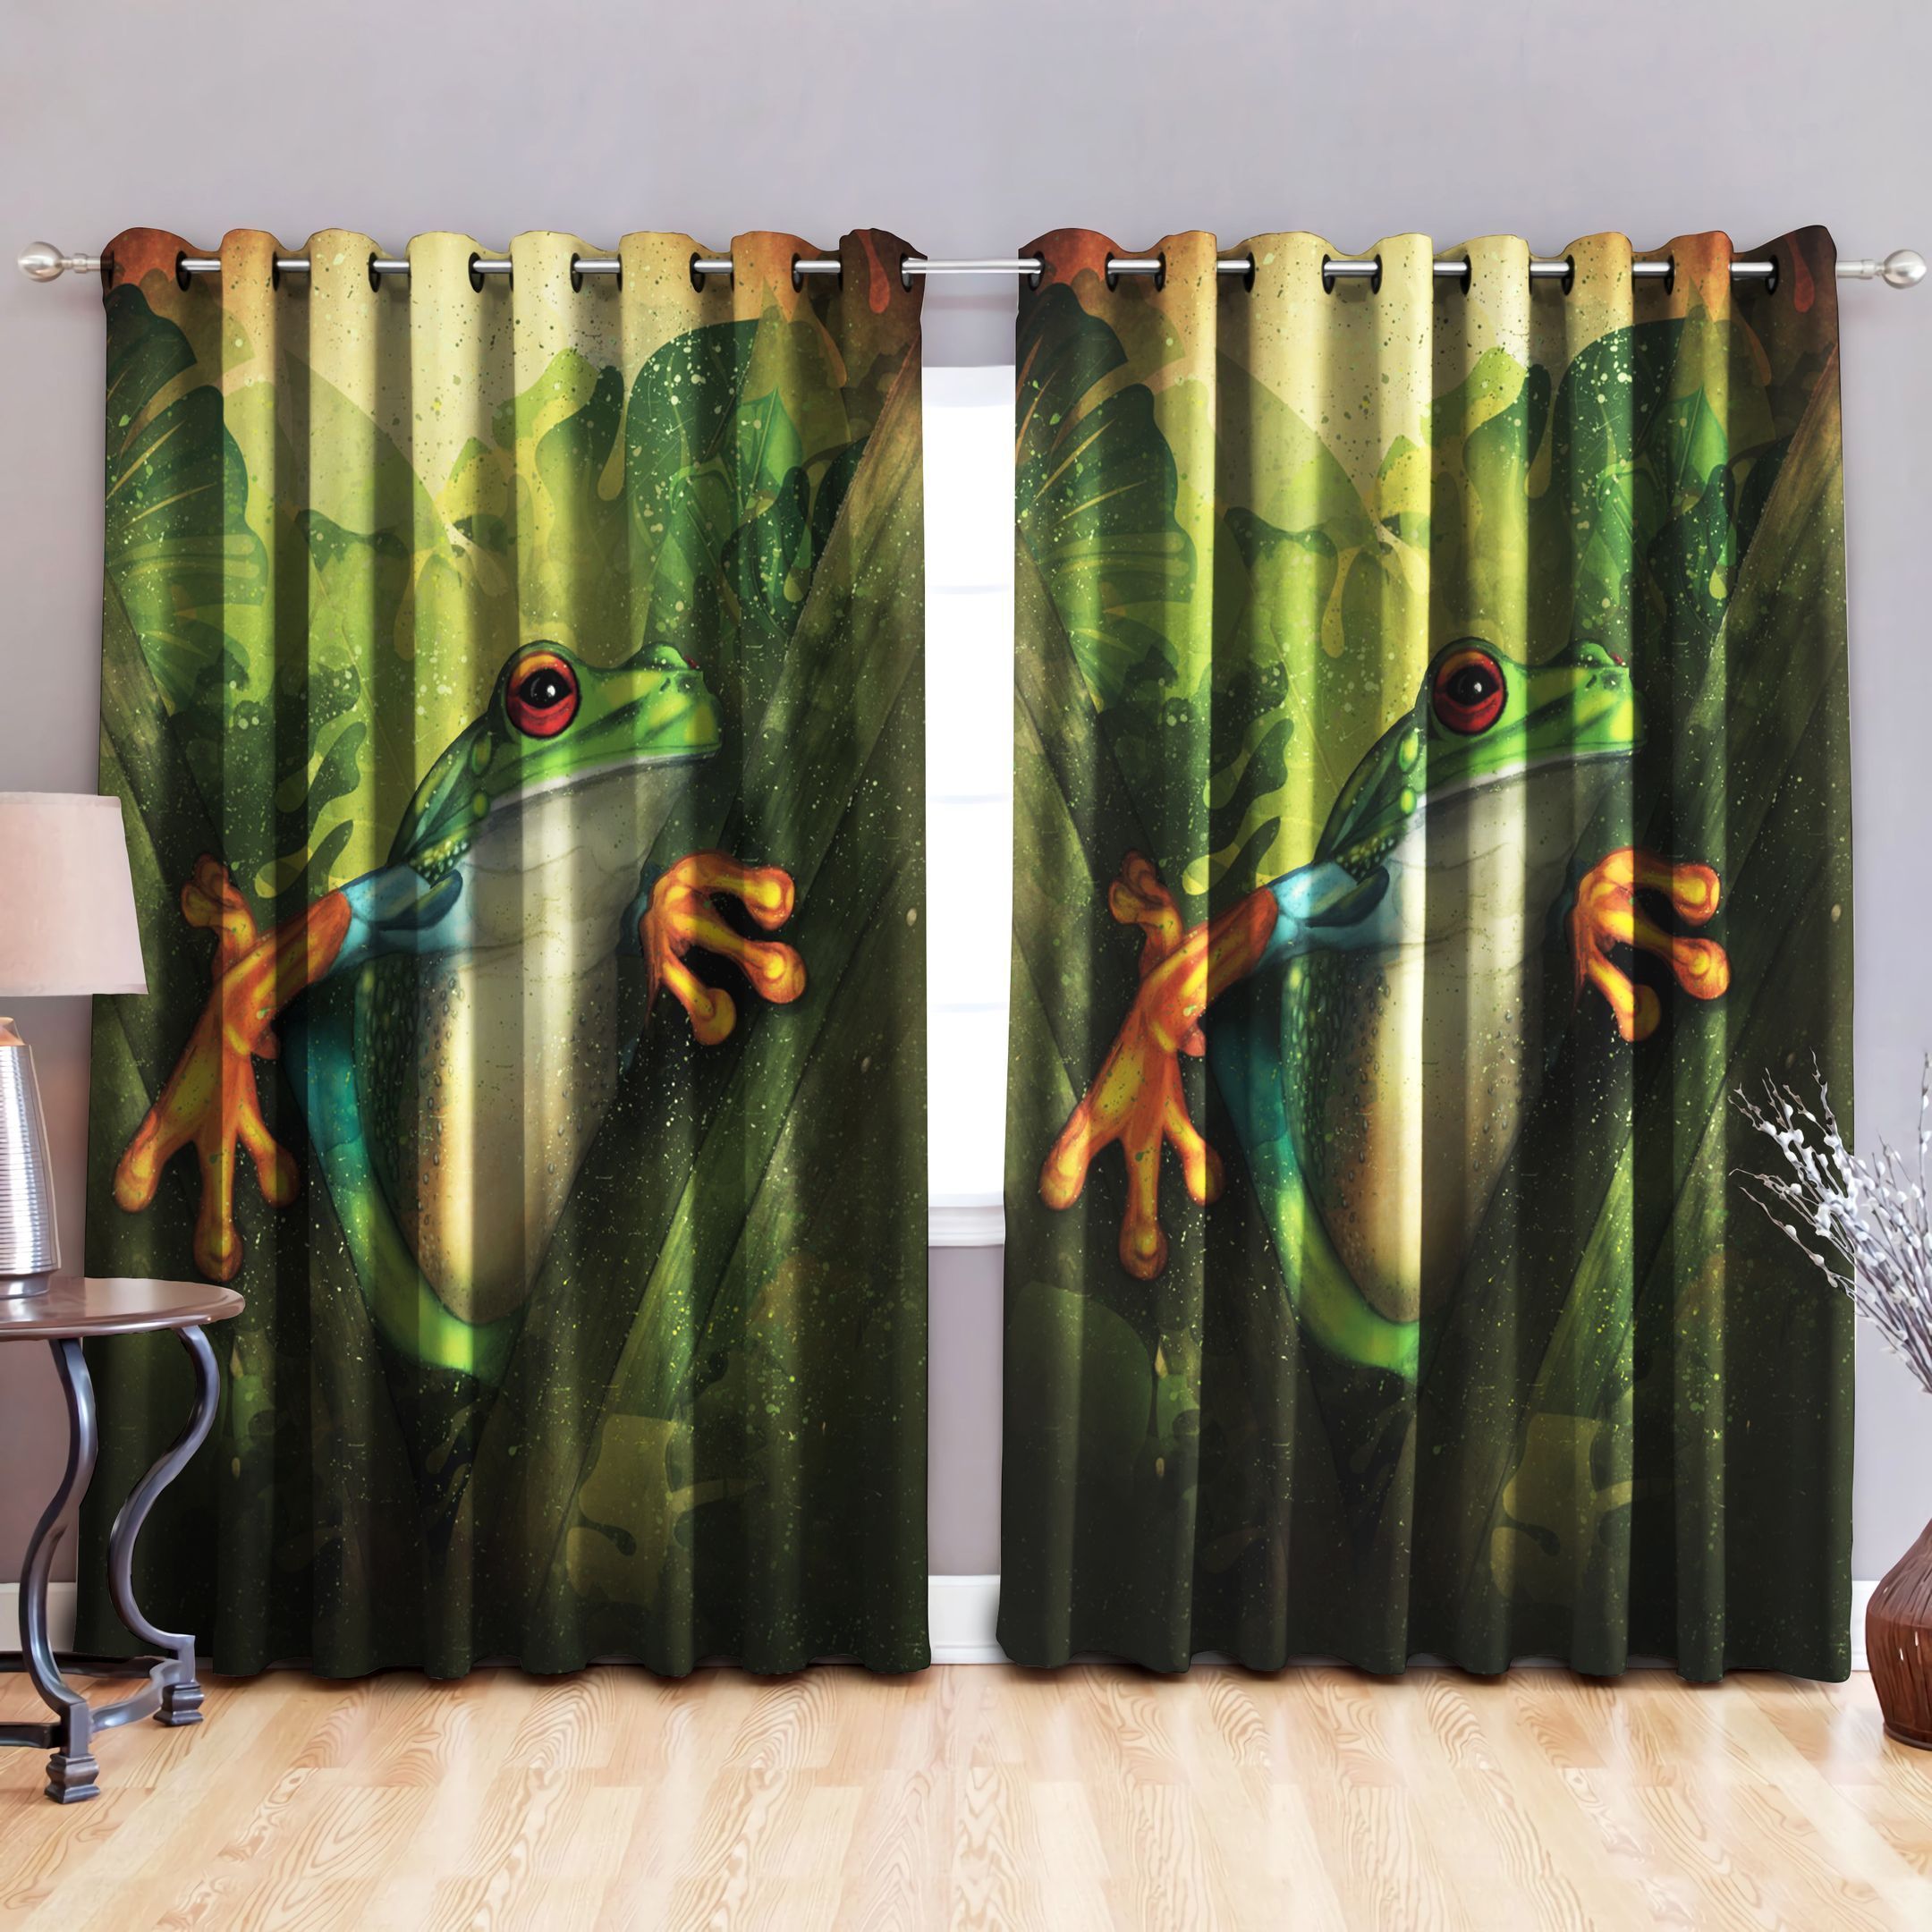 Green Frog Printed Window Curtains Home Decor